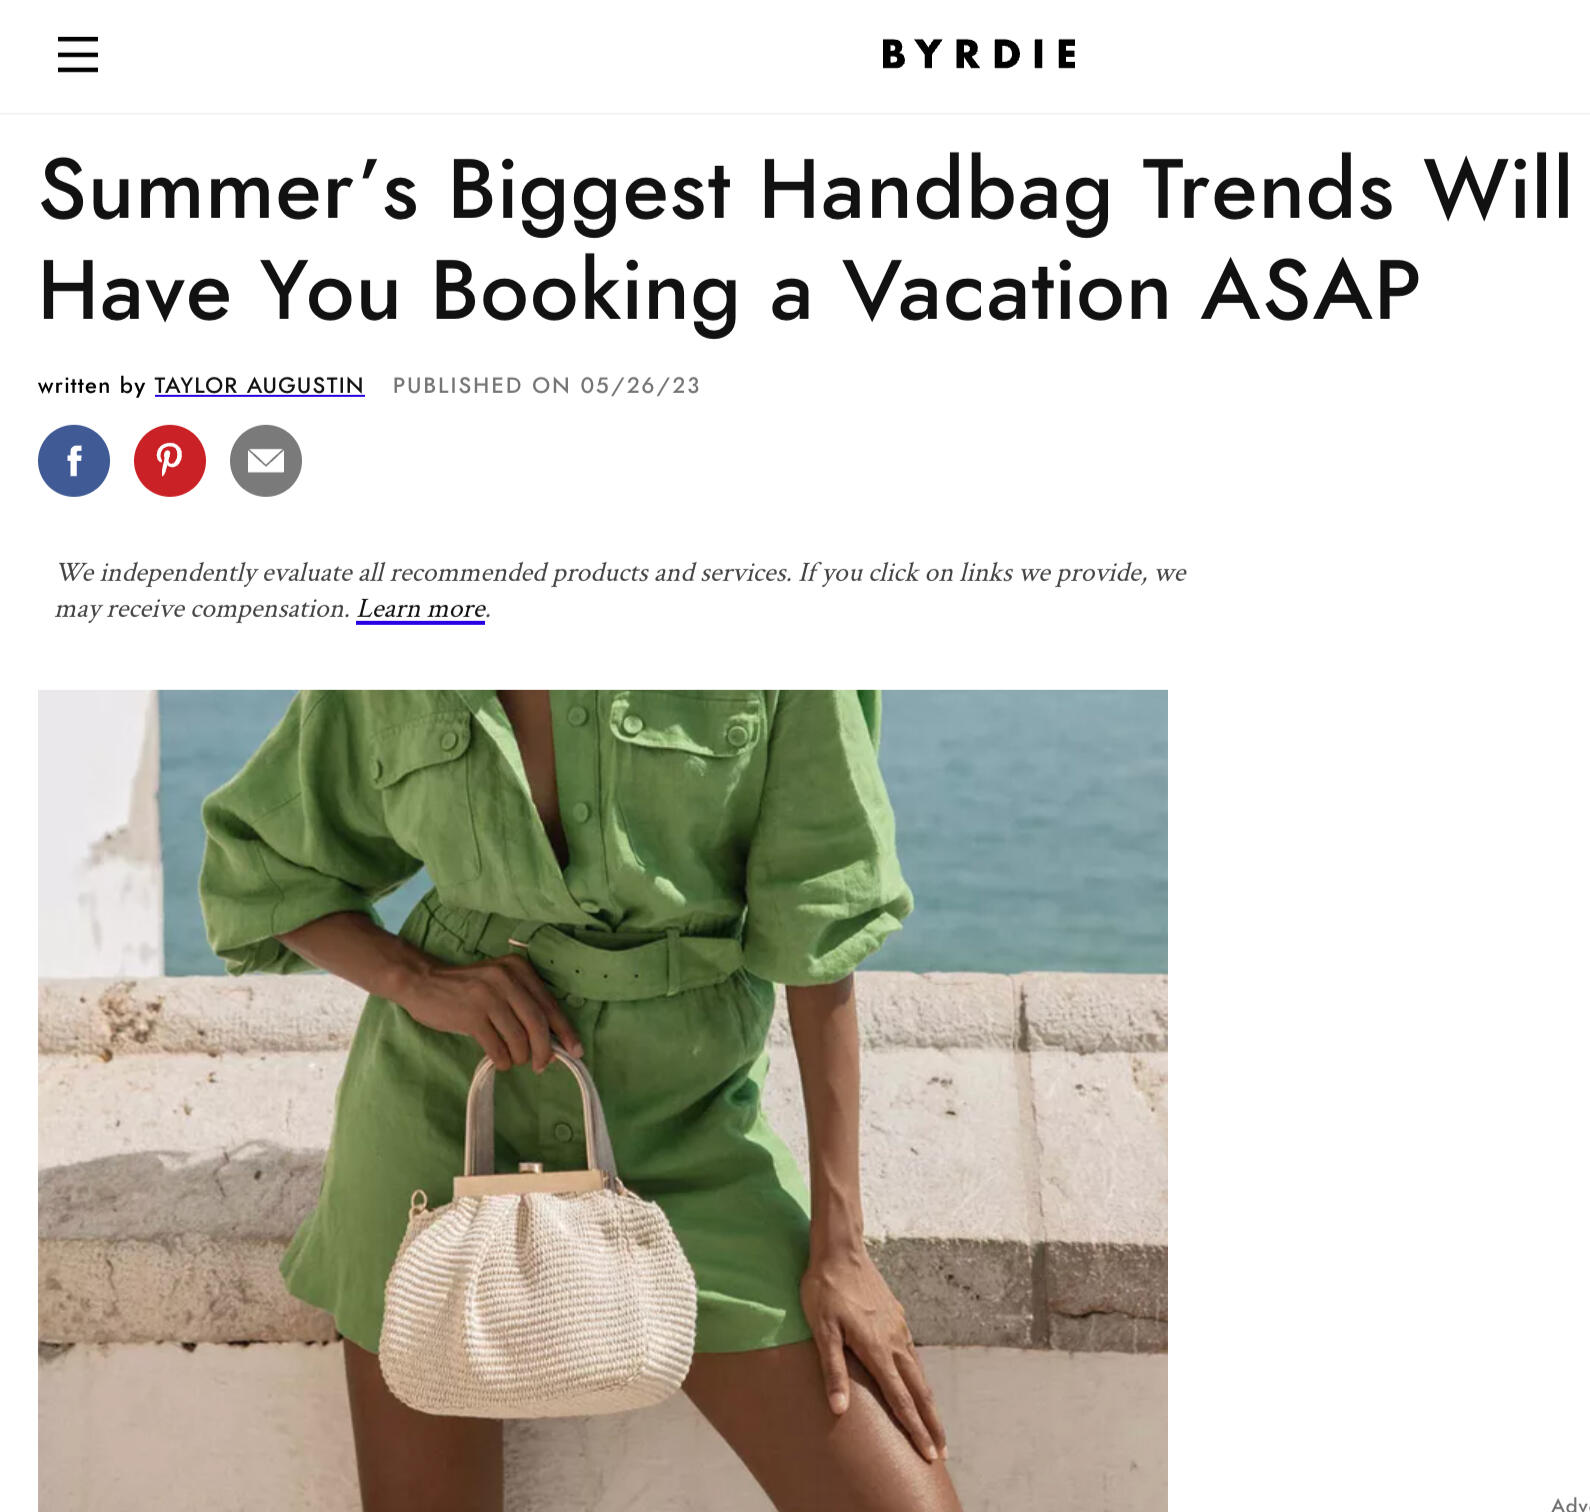 Summer's Biggest Handbag Trends Will Have You Booking a Vacation ASAP